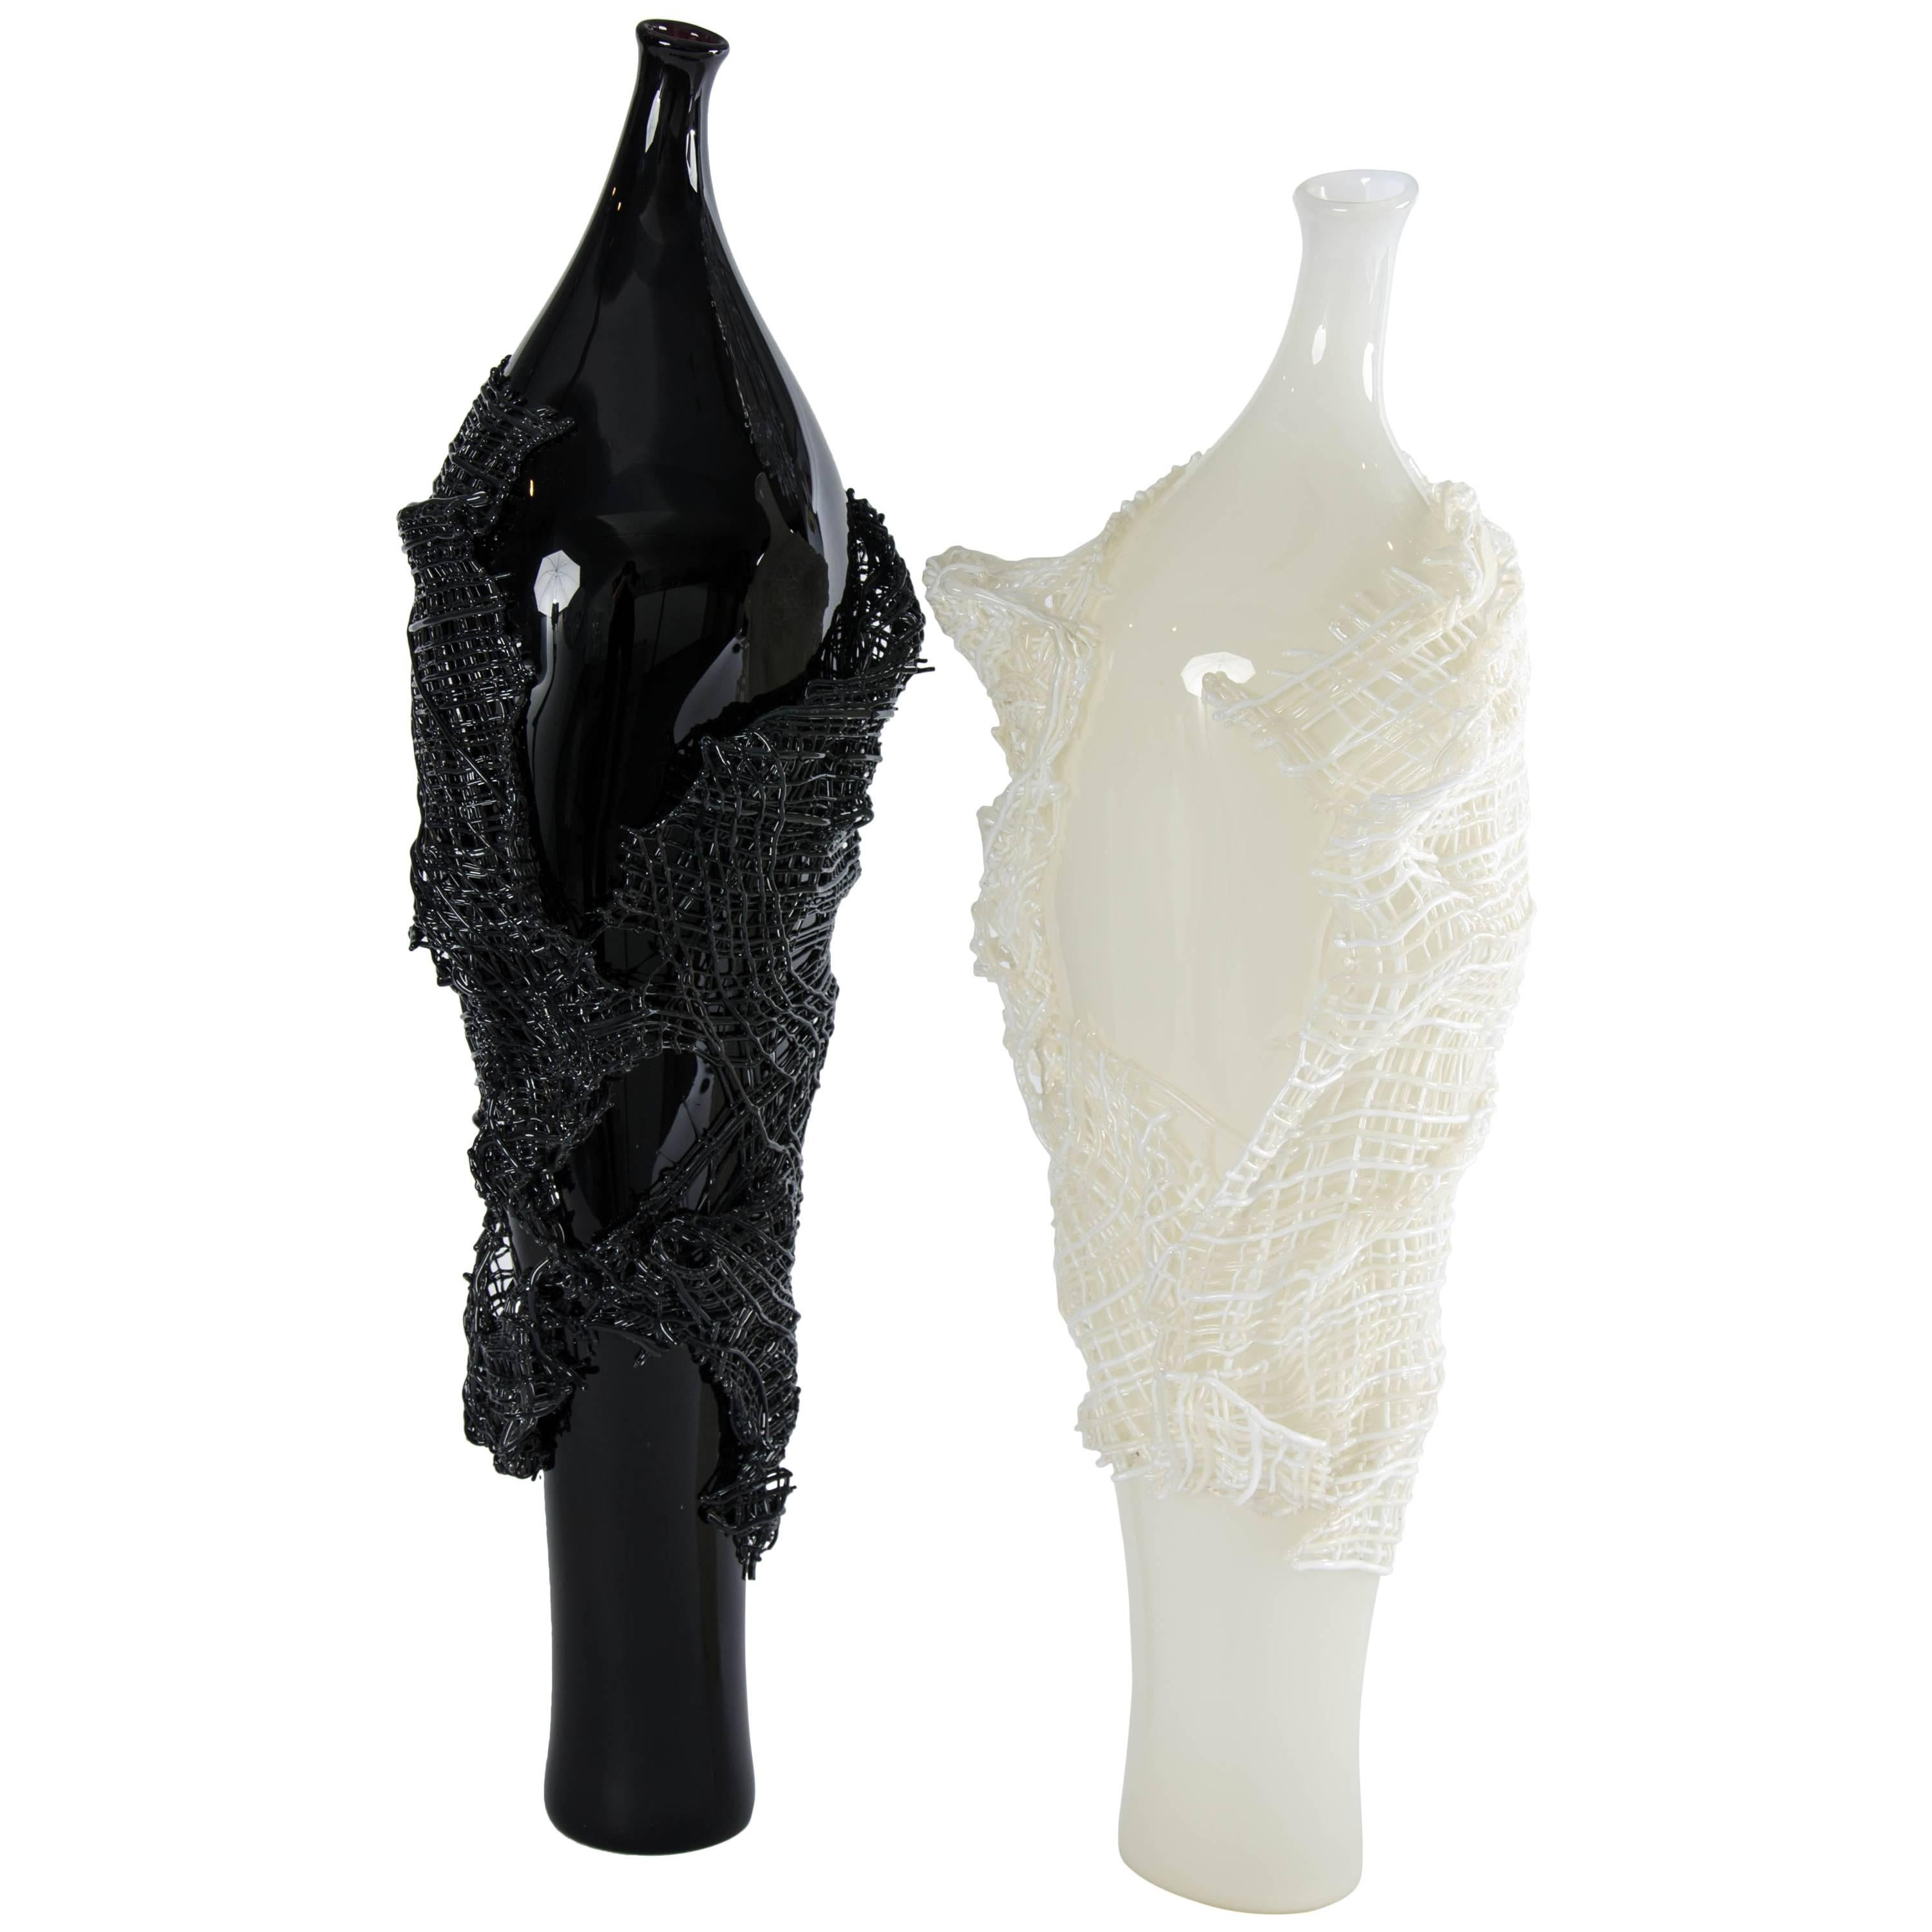 Odysseus and Calypso black and white glass sculptures by Cathryn Shilling